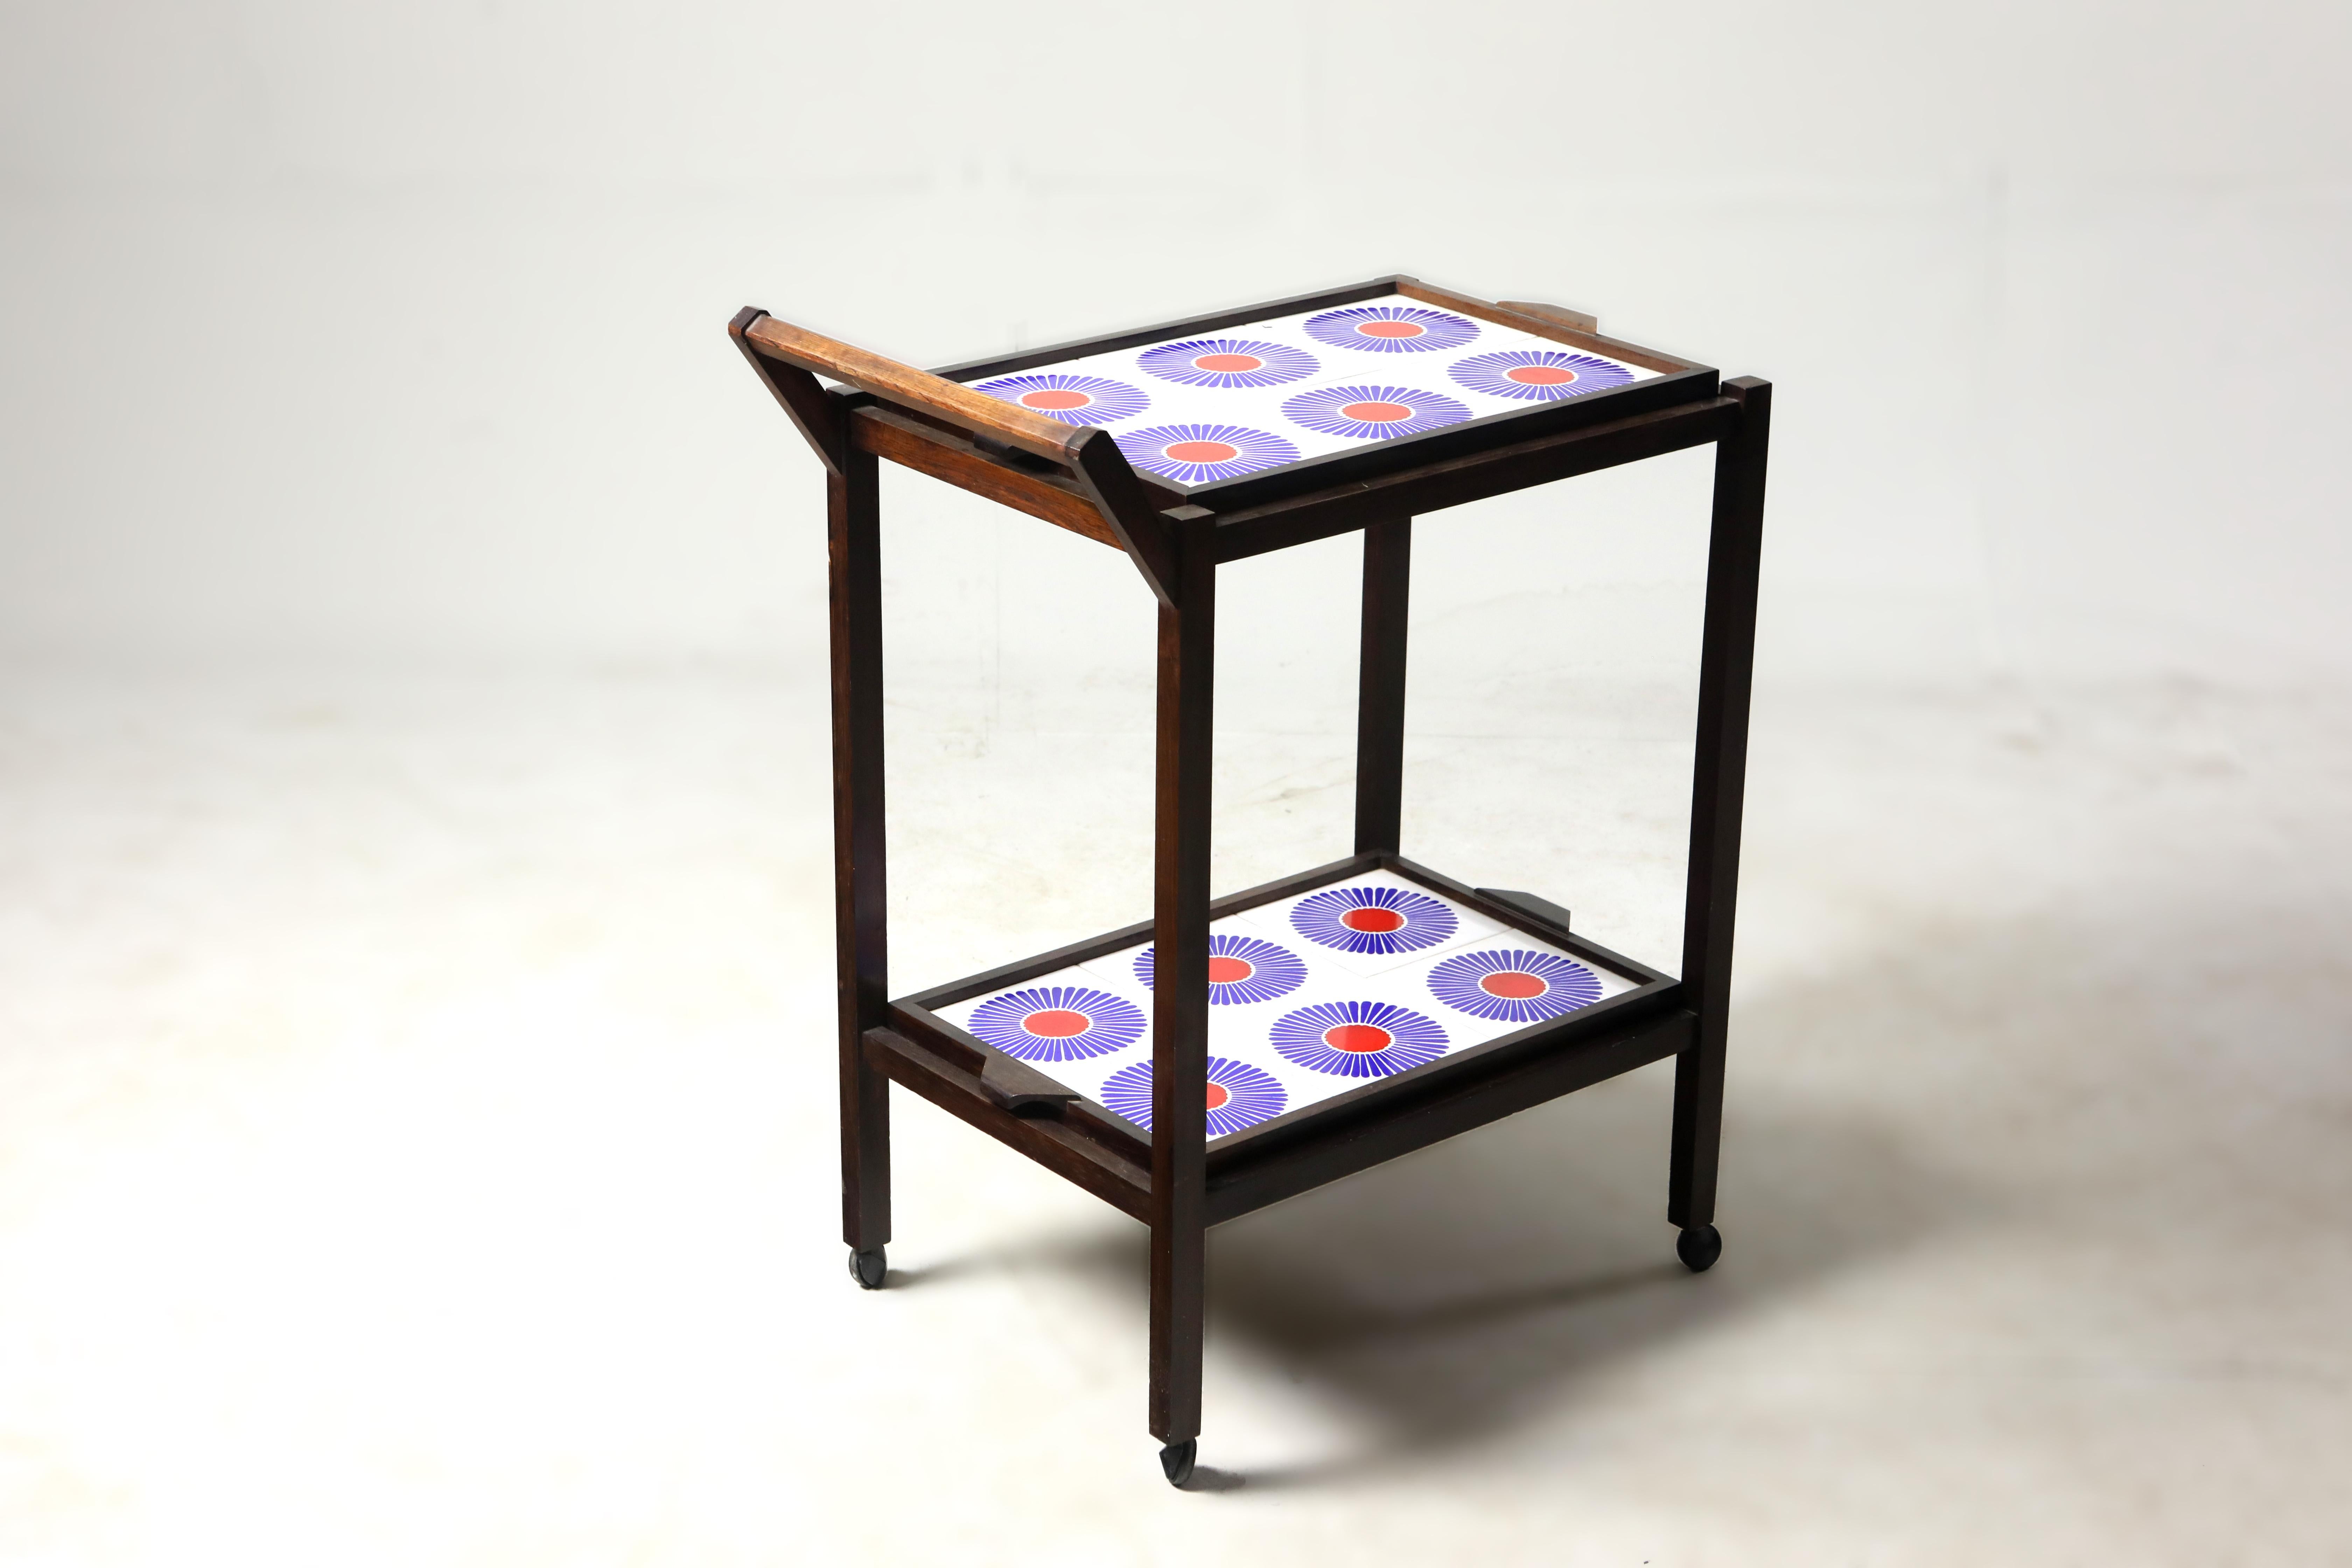 Brazilian Mid-Century Modern tile and hardwood tea-cart or bar-cart, Brazil, 1960s.

Structured in solid Brazilian hardwood, this charming 1960s tea-cart features two removable trays lined with floral motif ceramic tiles and casters for mobility.